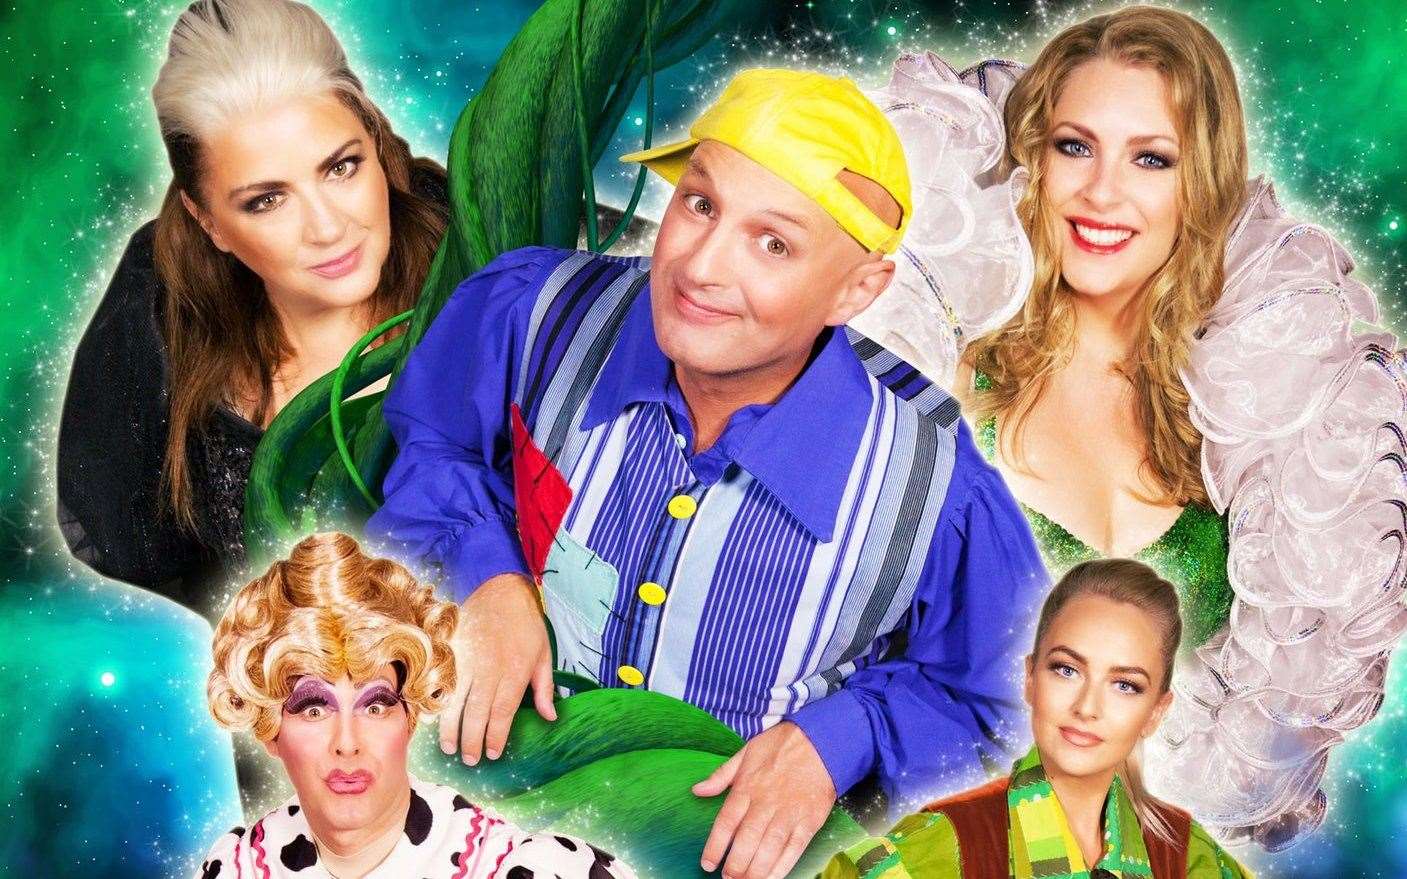 Jack And The Beanstalk is coming to the Stag Theatre in Sevenoaks